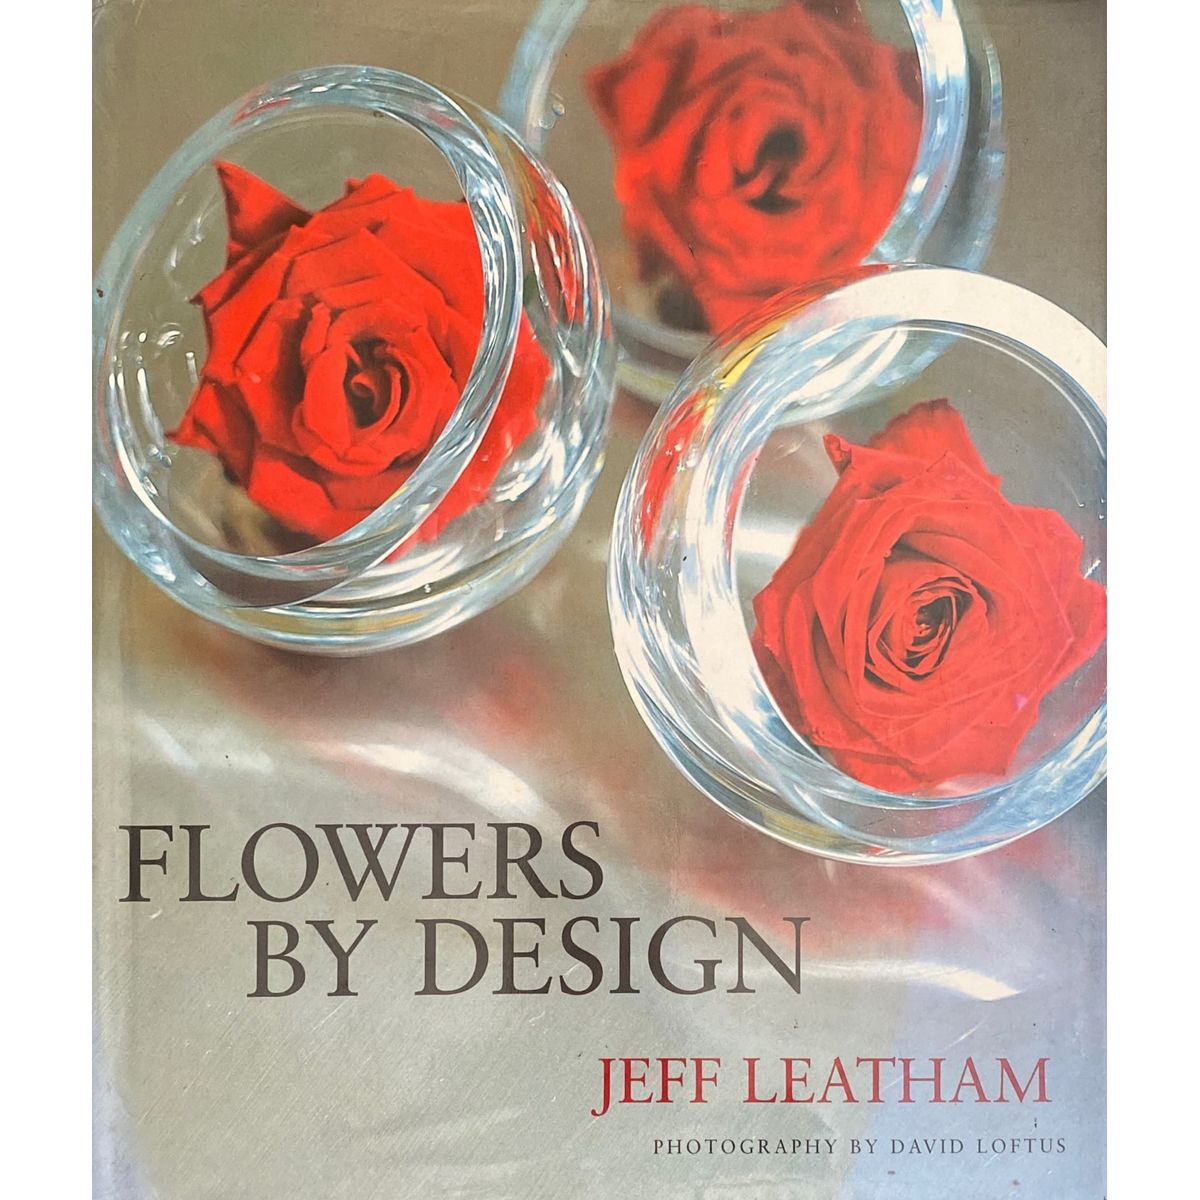 ISBN: 9781862054998 / 1862054991 - Flowers by Design by Jeff Leatham, photography by David Loftus [2004]